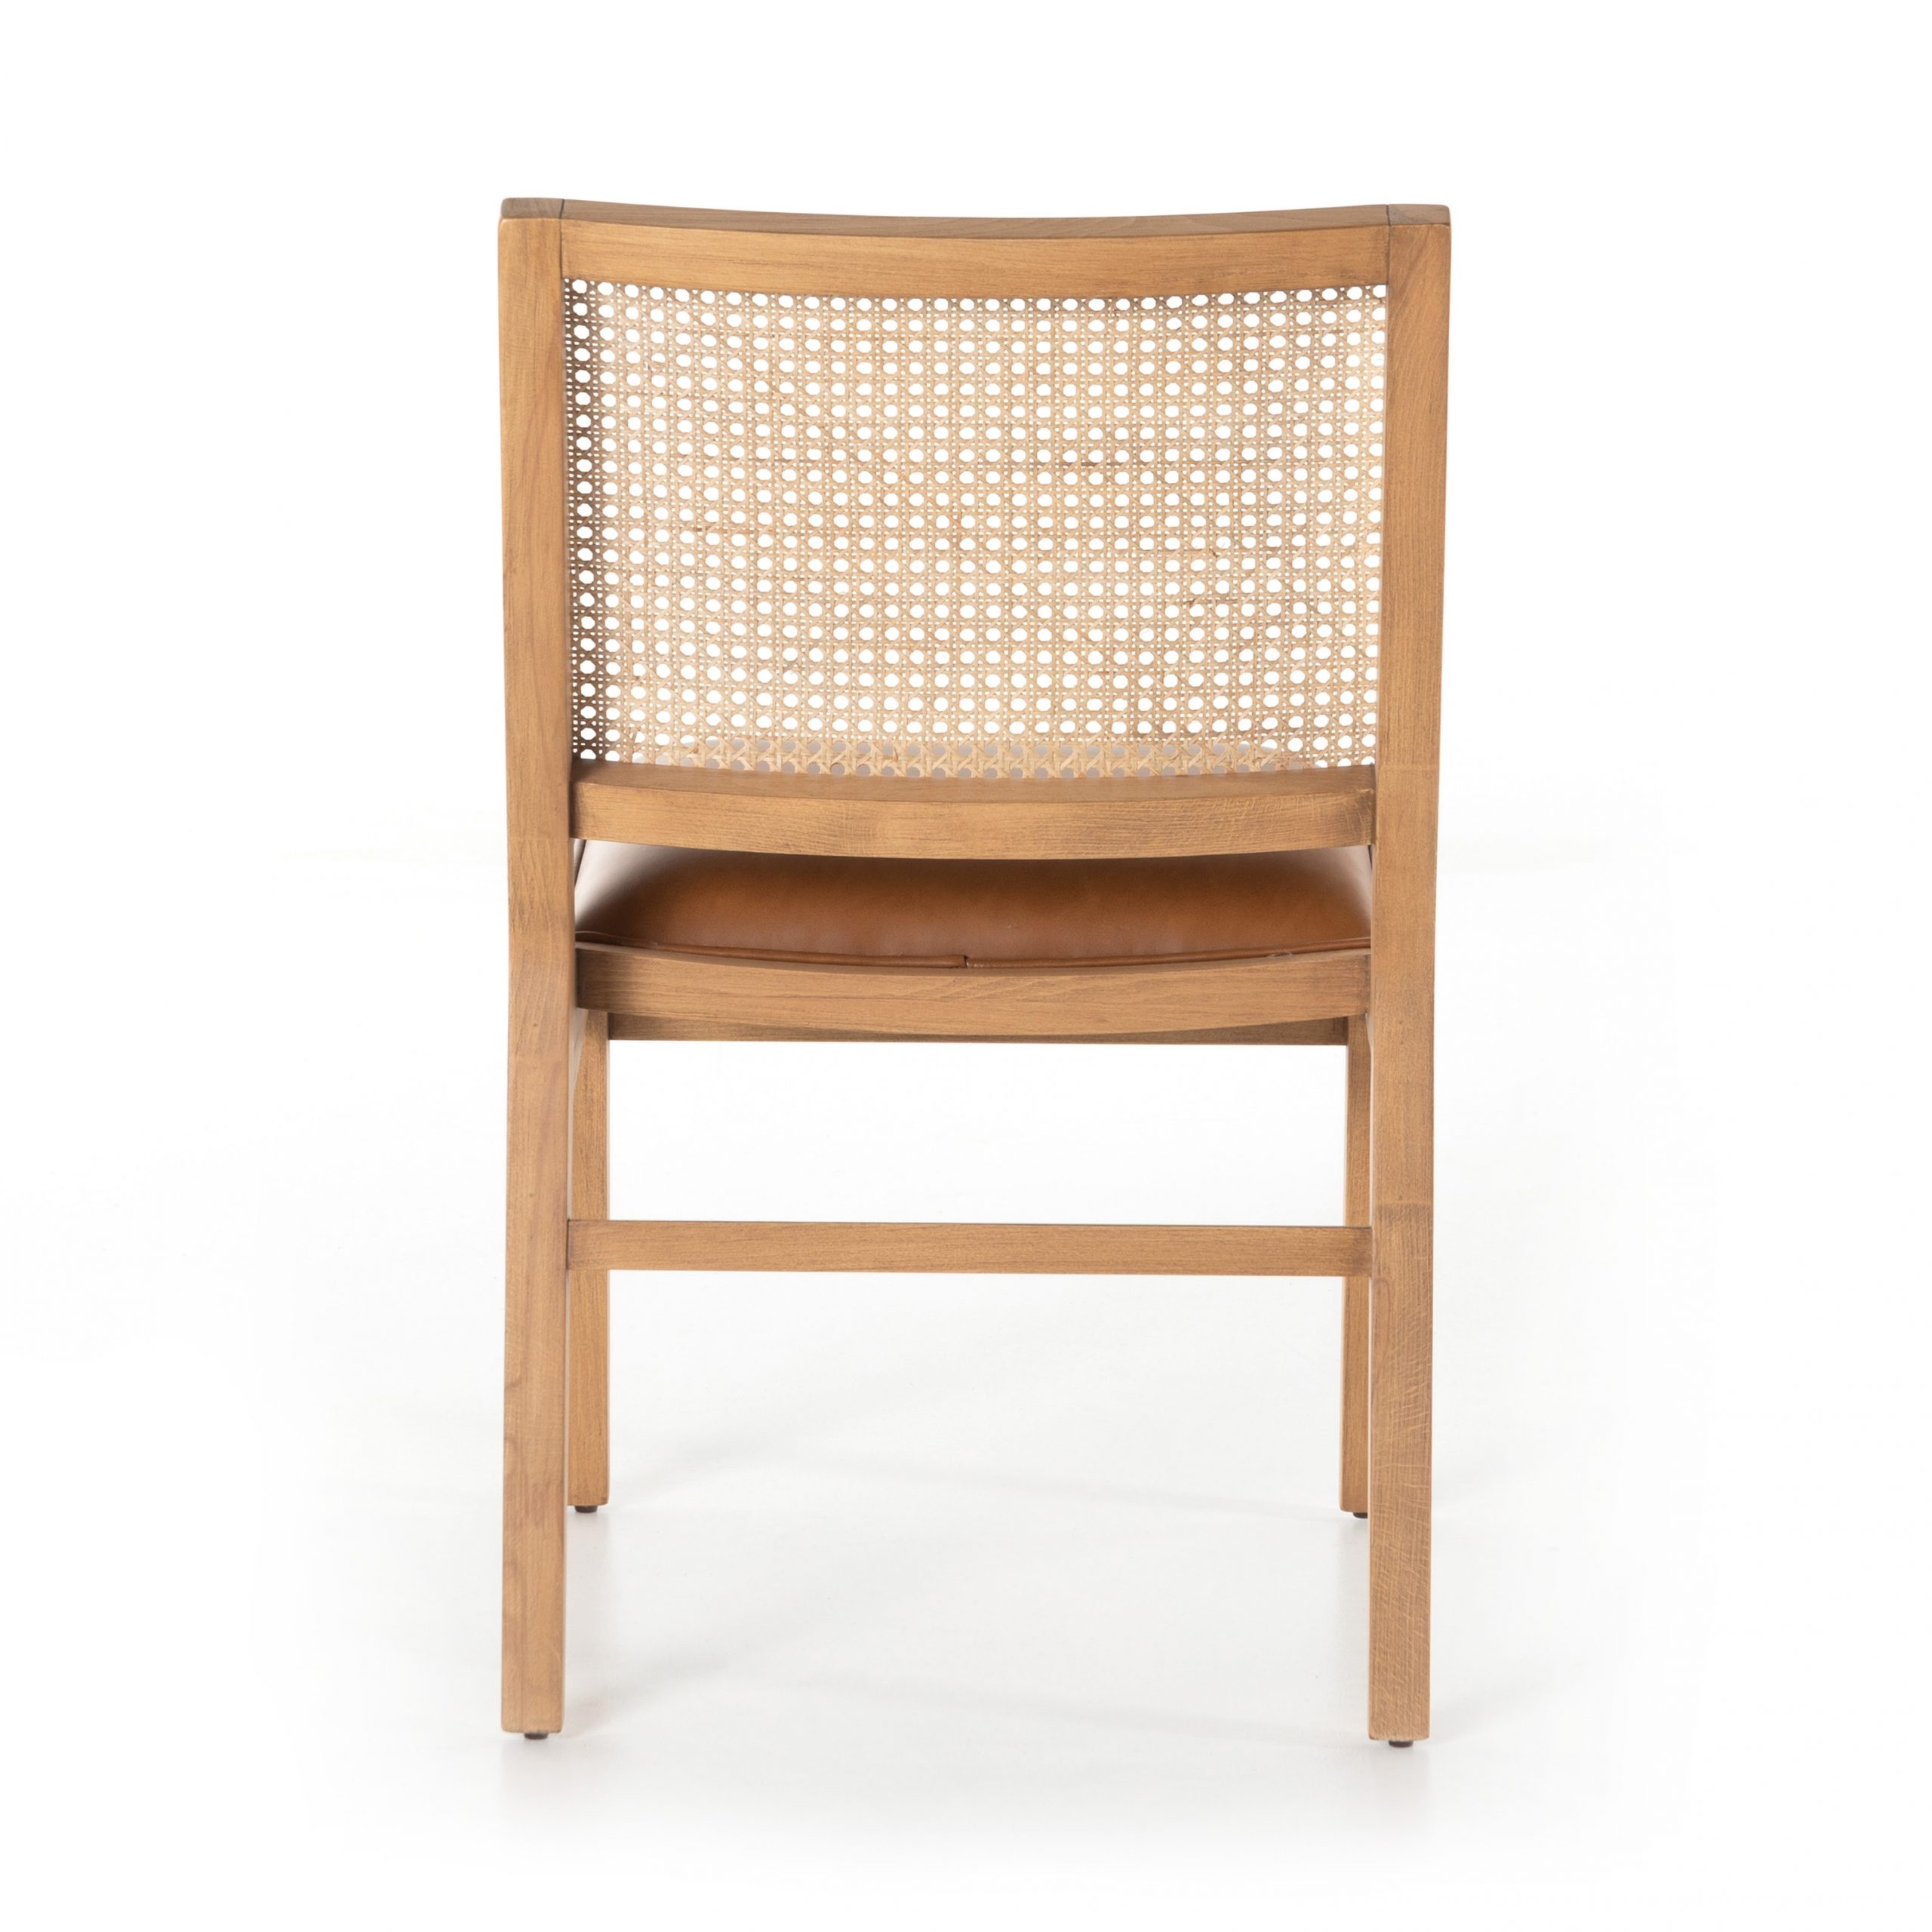 Saylor Dining Chair | Duvall & Co.